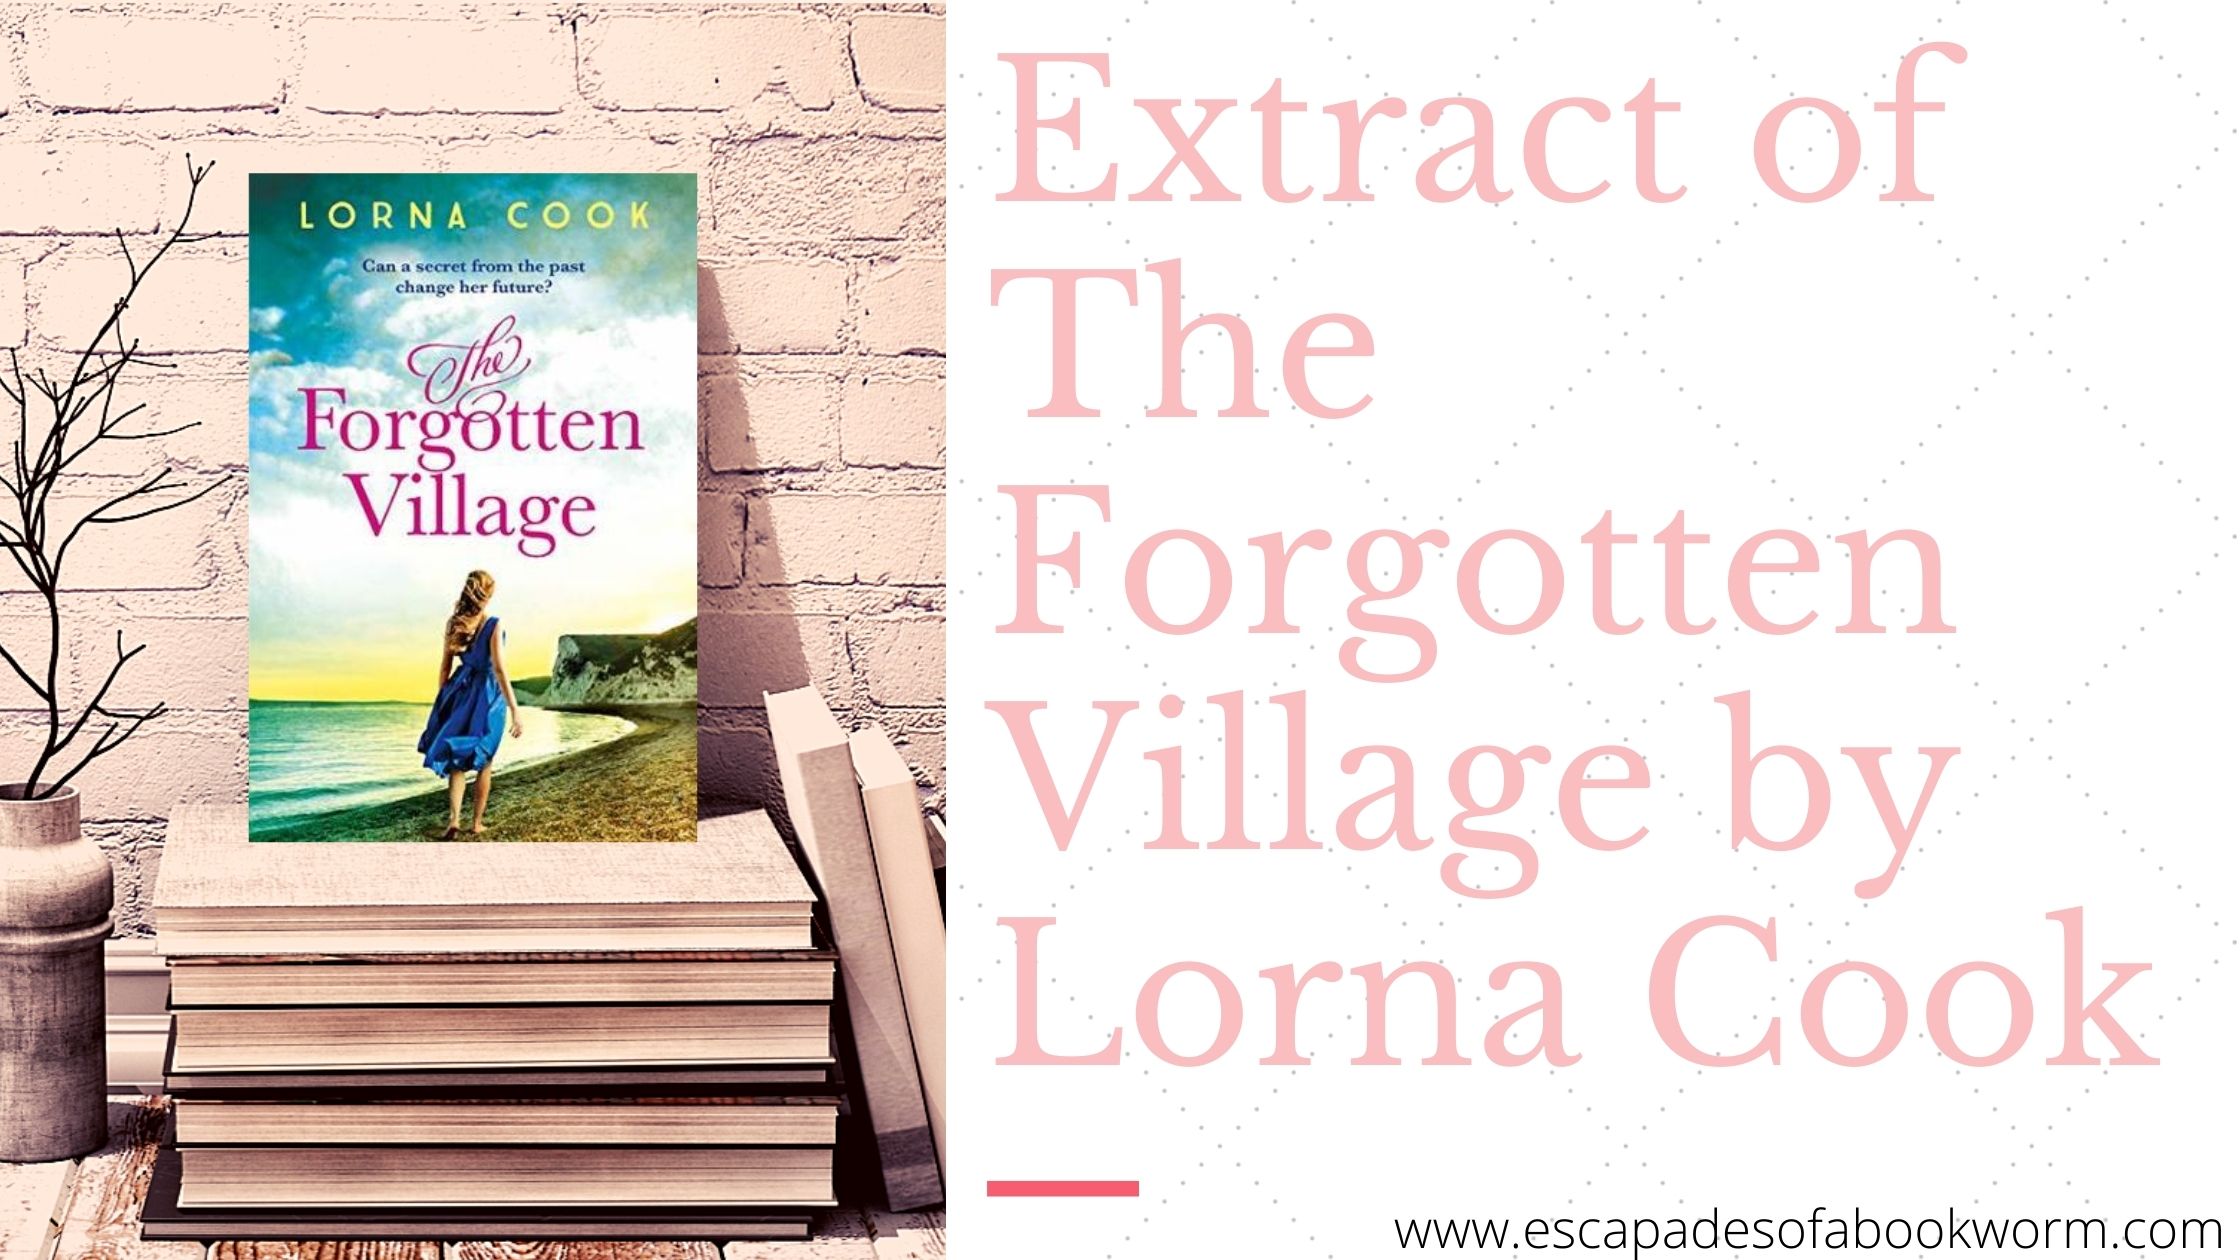 Extract: The Forgotten Village by Lorna Cook